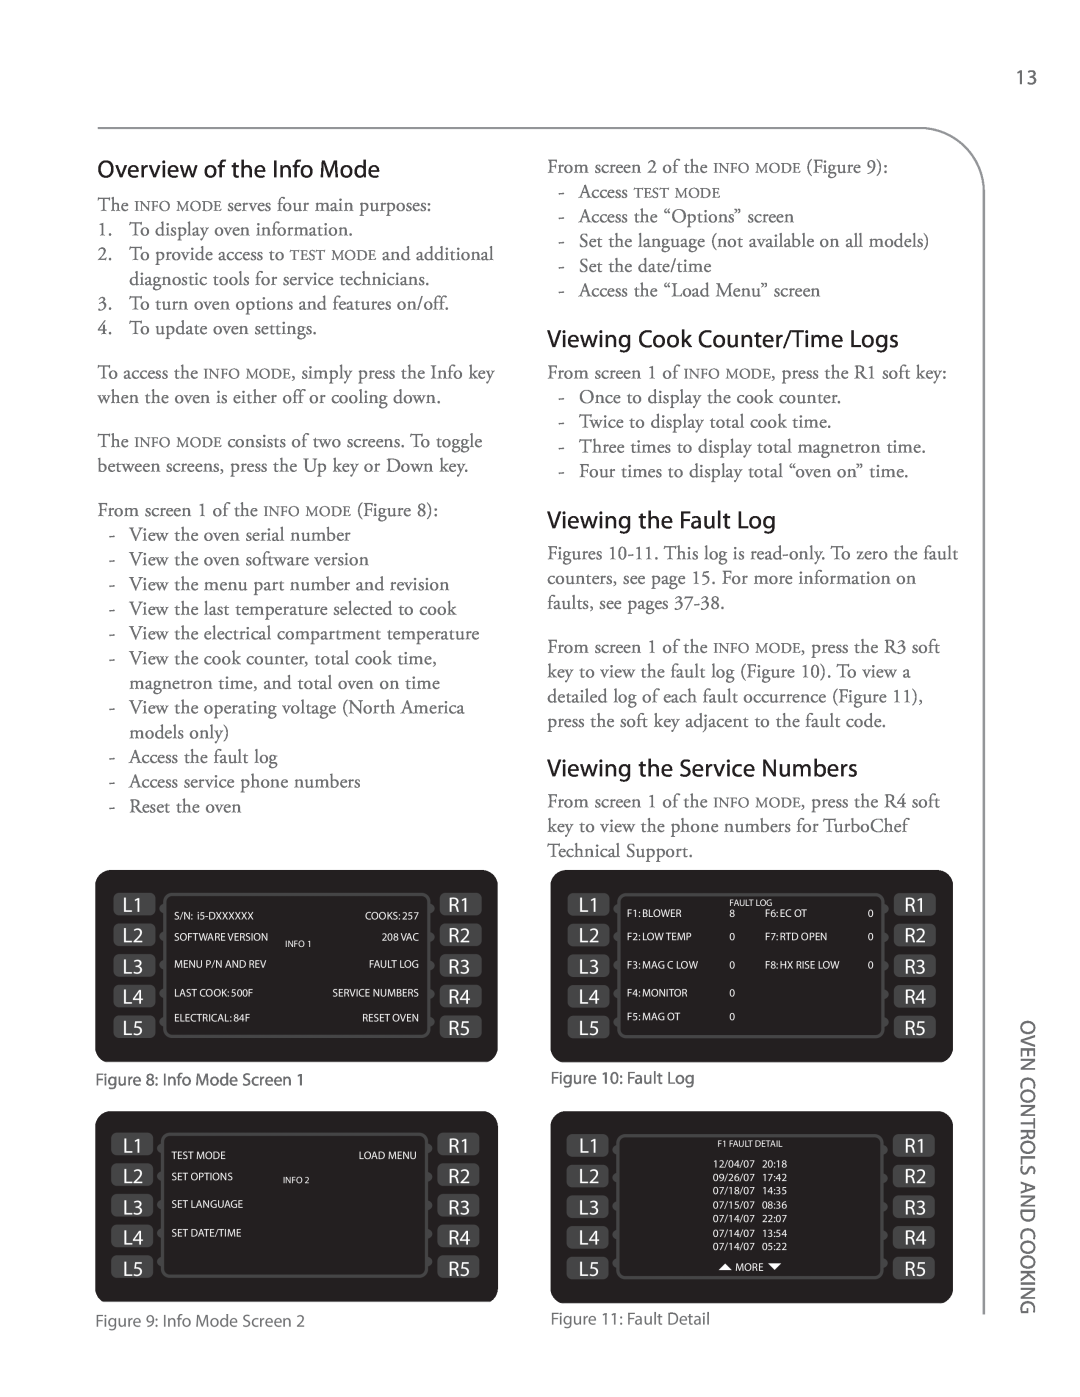 Turbo Chef Technologies i5 service manual Overview of the Info Mode, Viewing Cook Counter/Time Logs, Viewing the Fault Log 